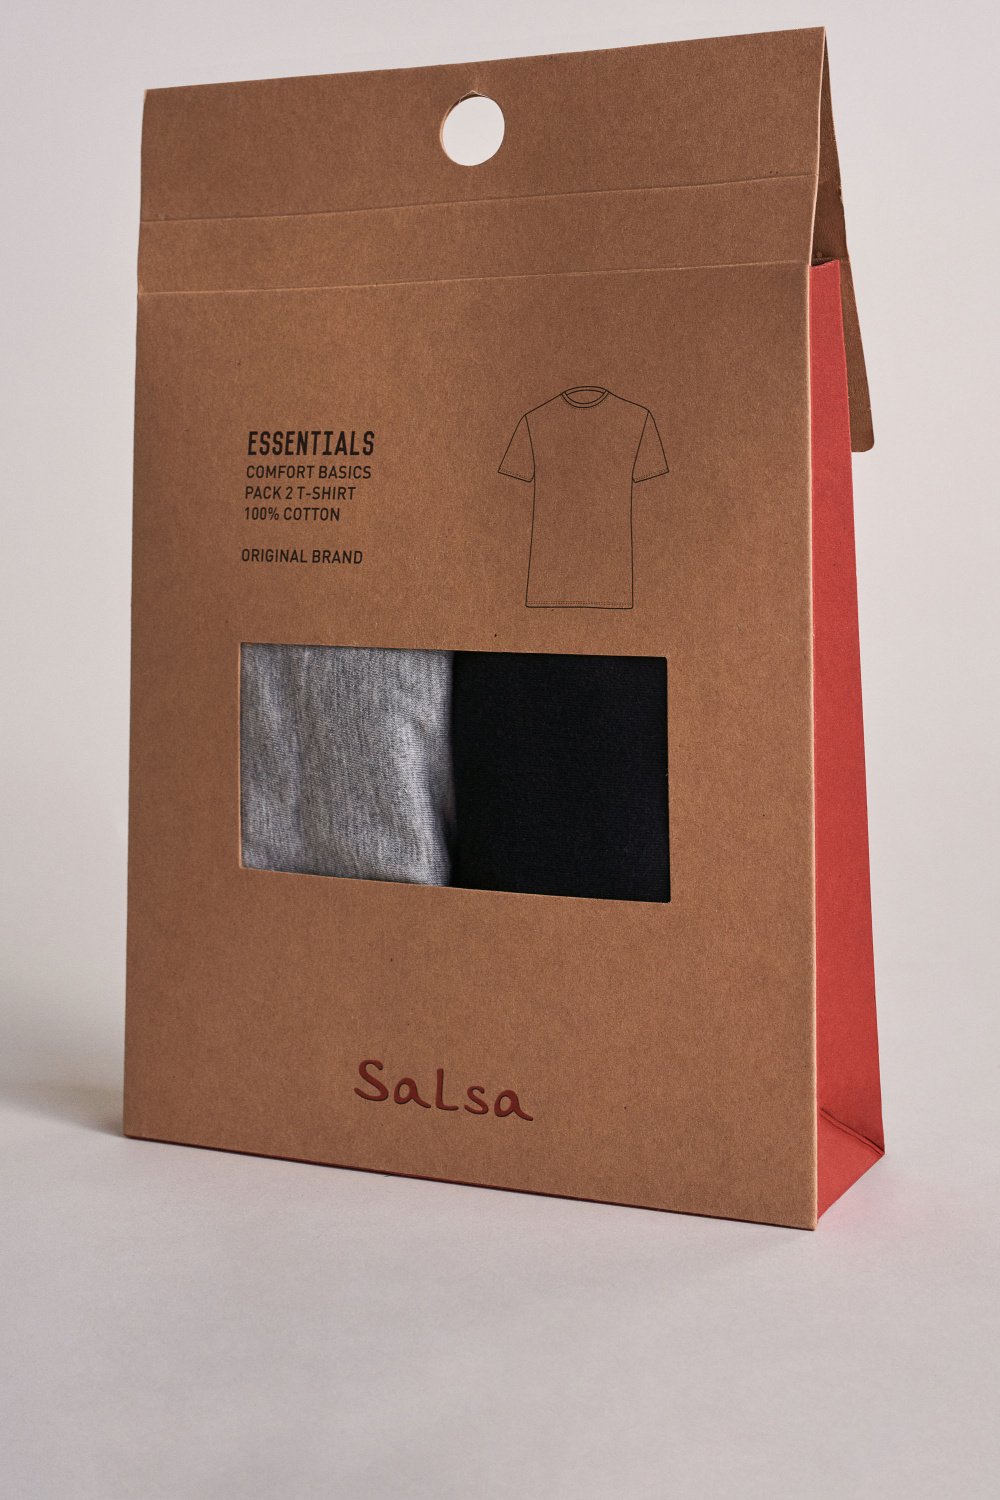 Pack of 2 t-shirts - Salsa